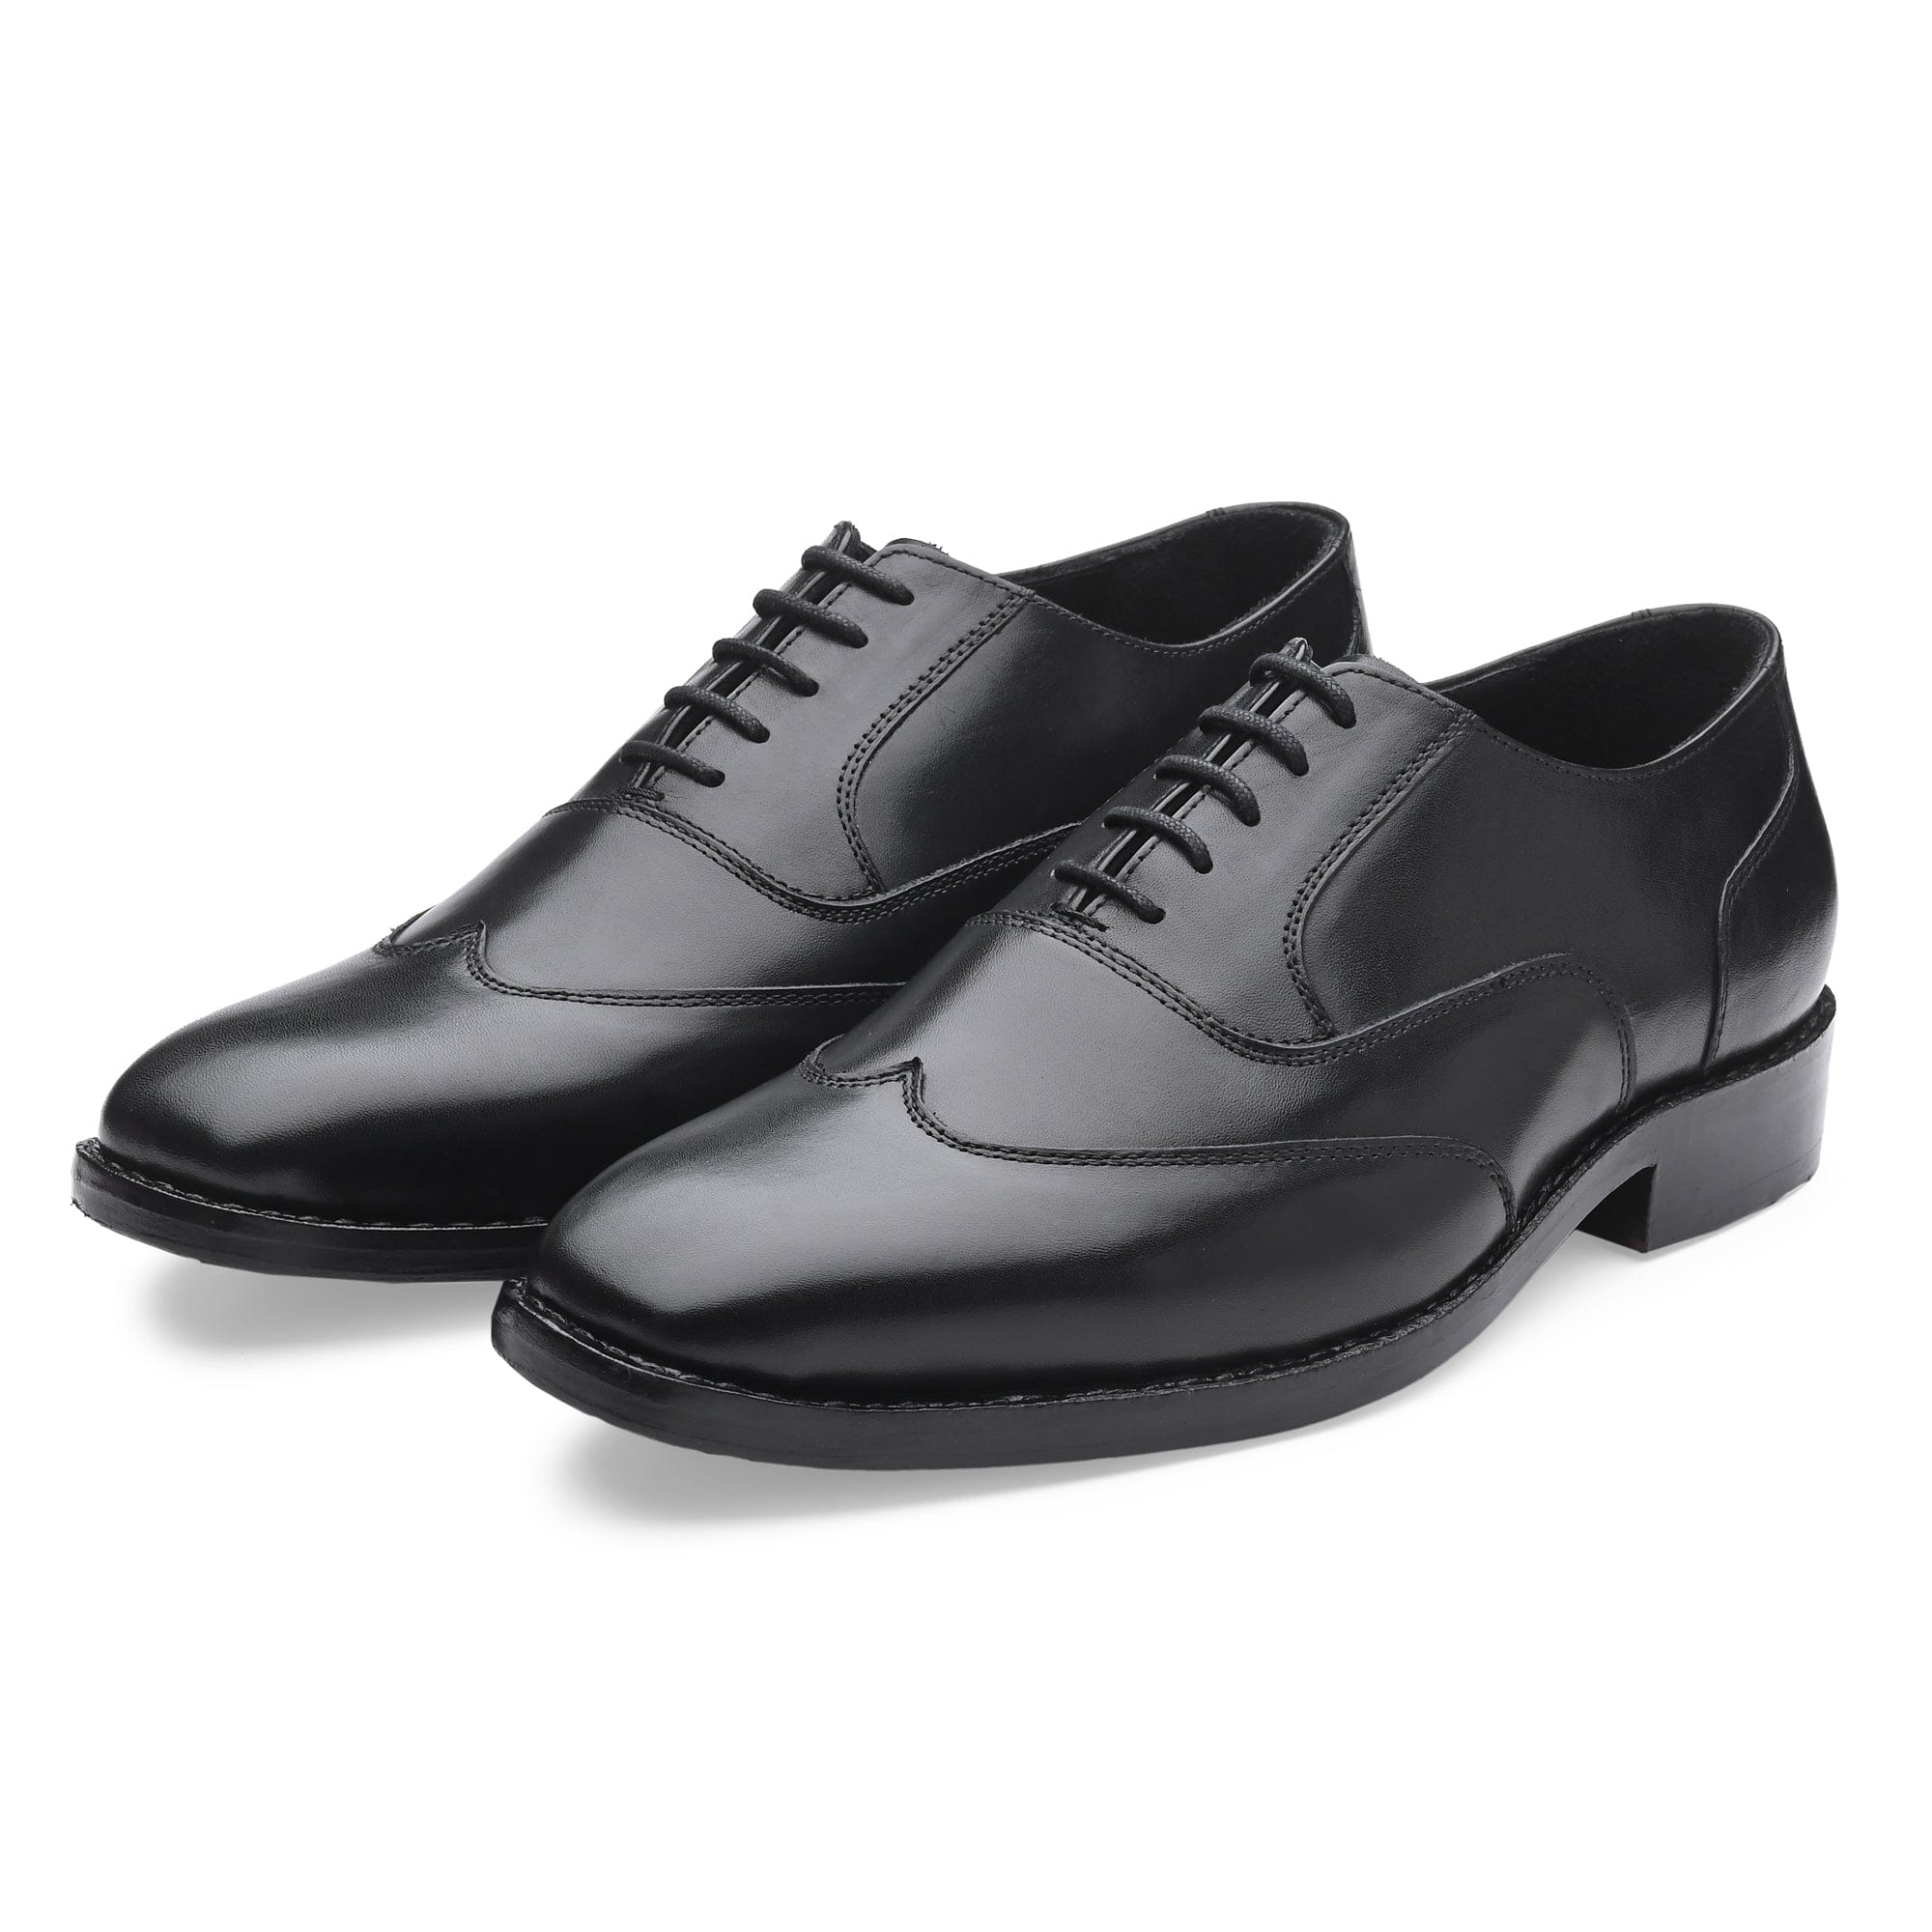 Wingtip Oxford Black Italian Leather Dress Shoes Reverse Goodyear Welted